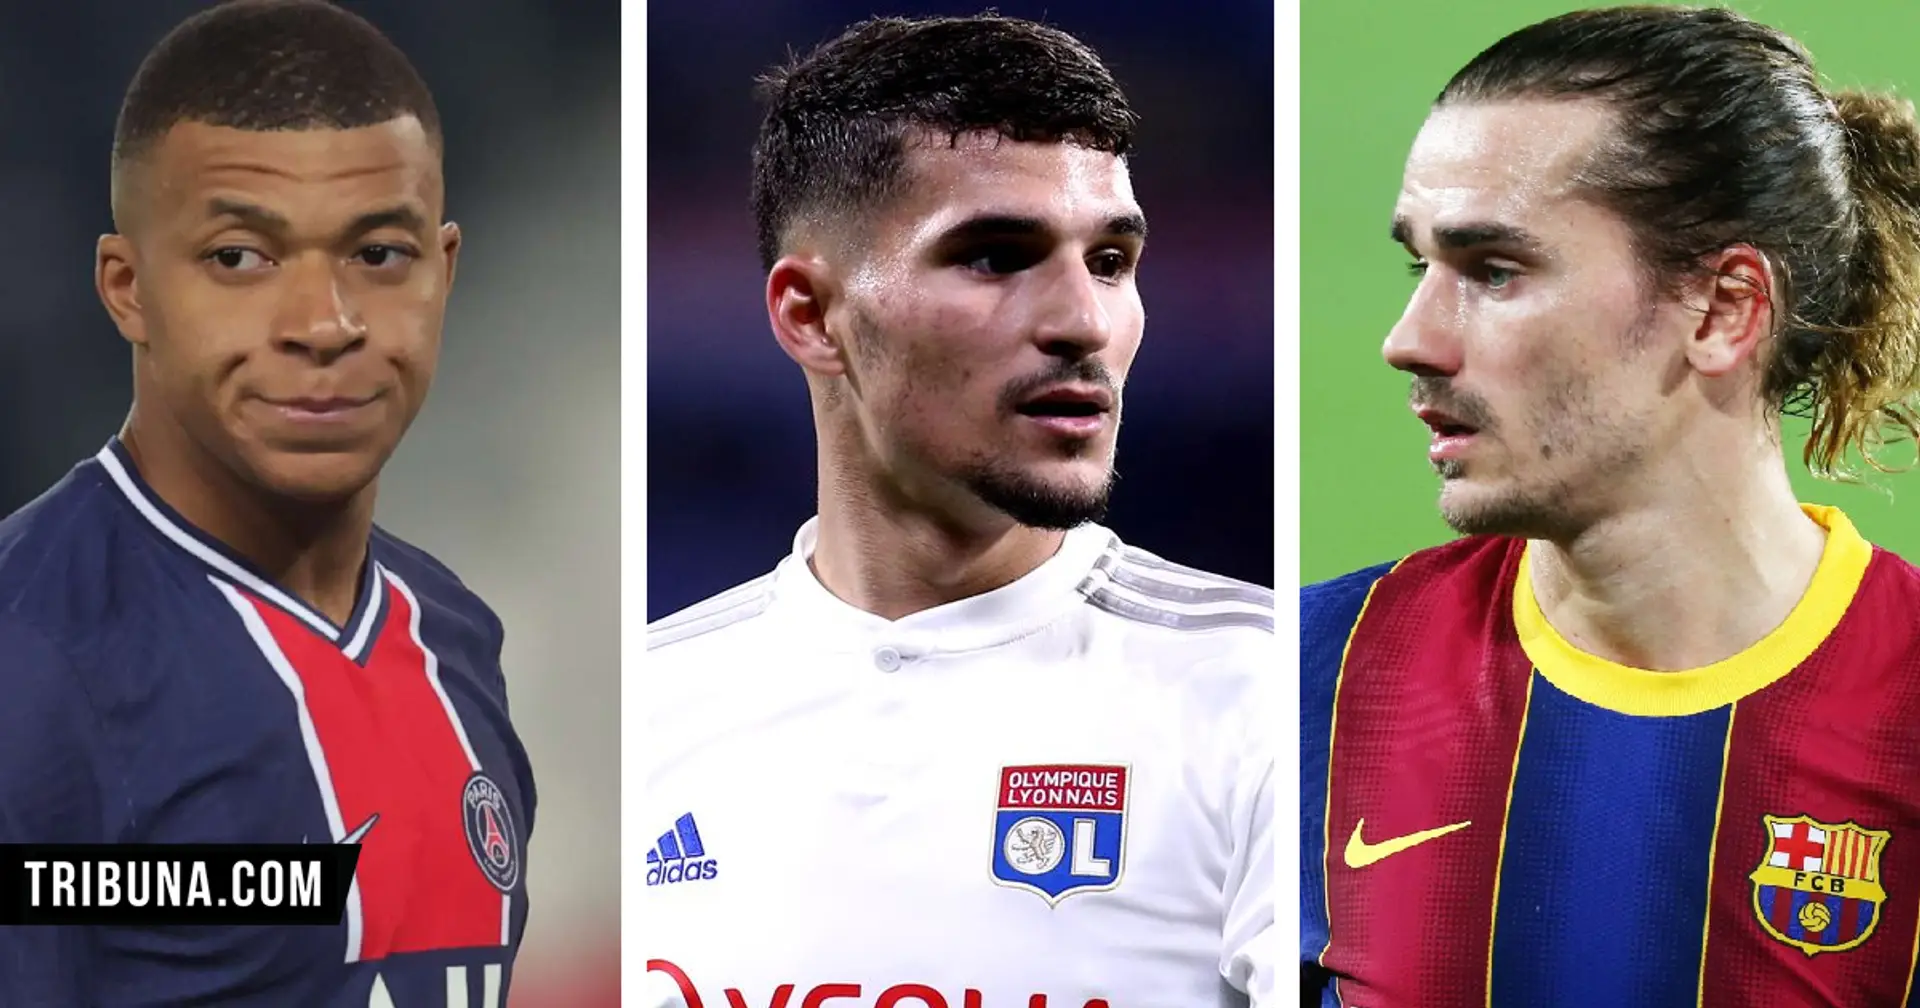 Mbappe to Madrid? Aouar and Griezmann linked: All Liverpool transfer updates LIVE blog